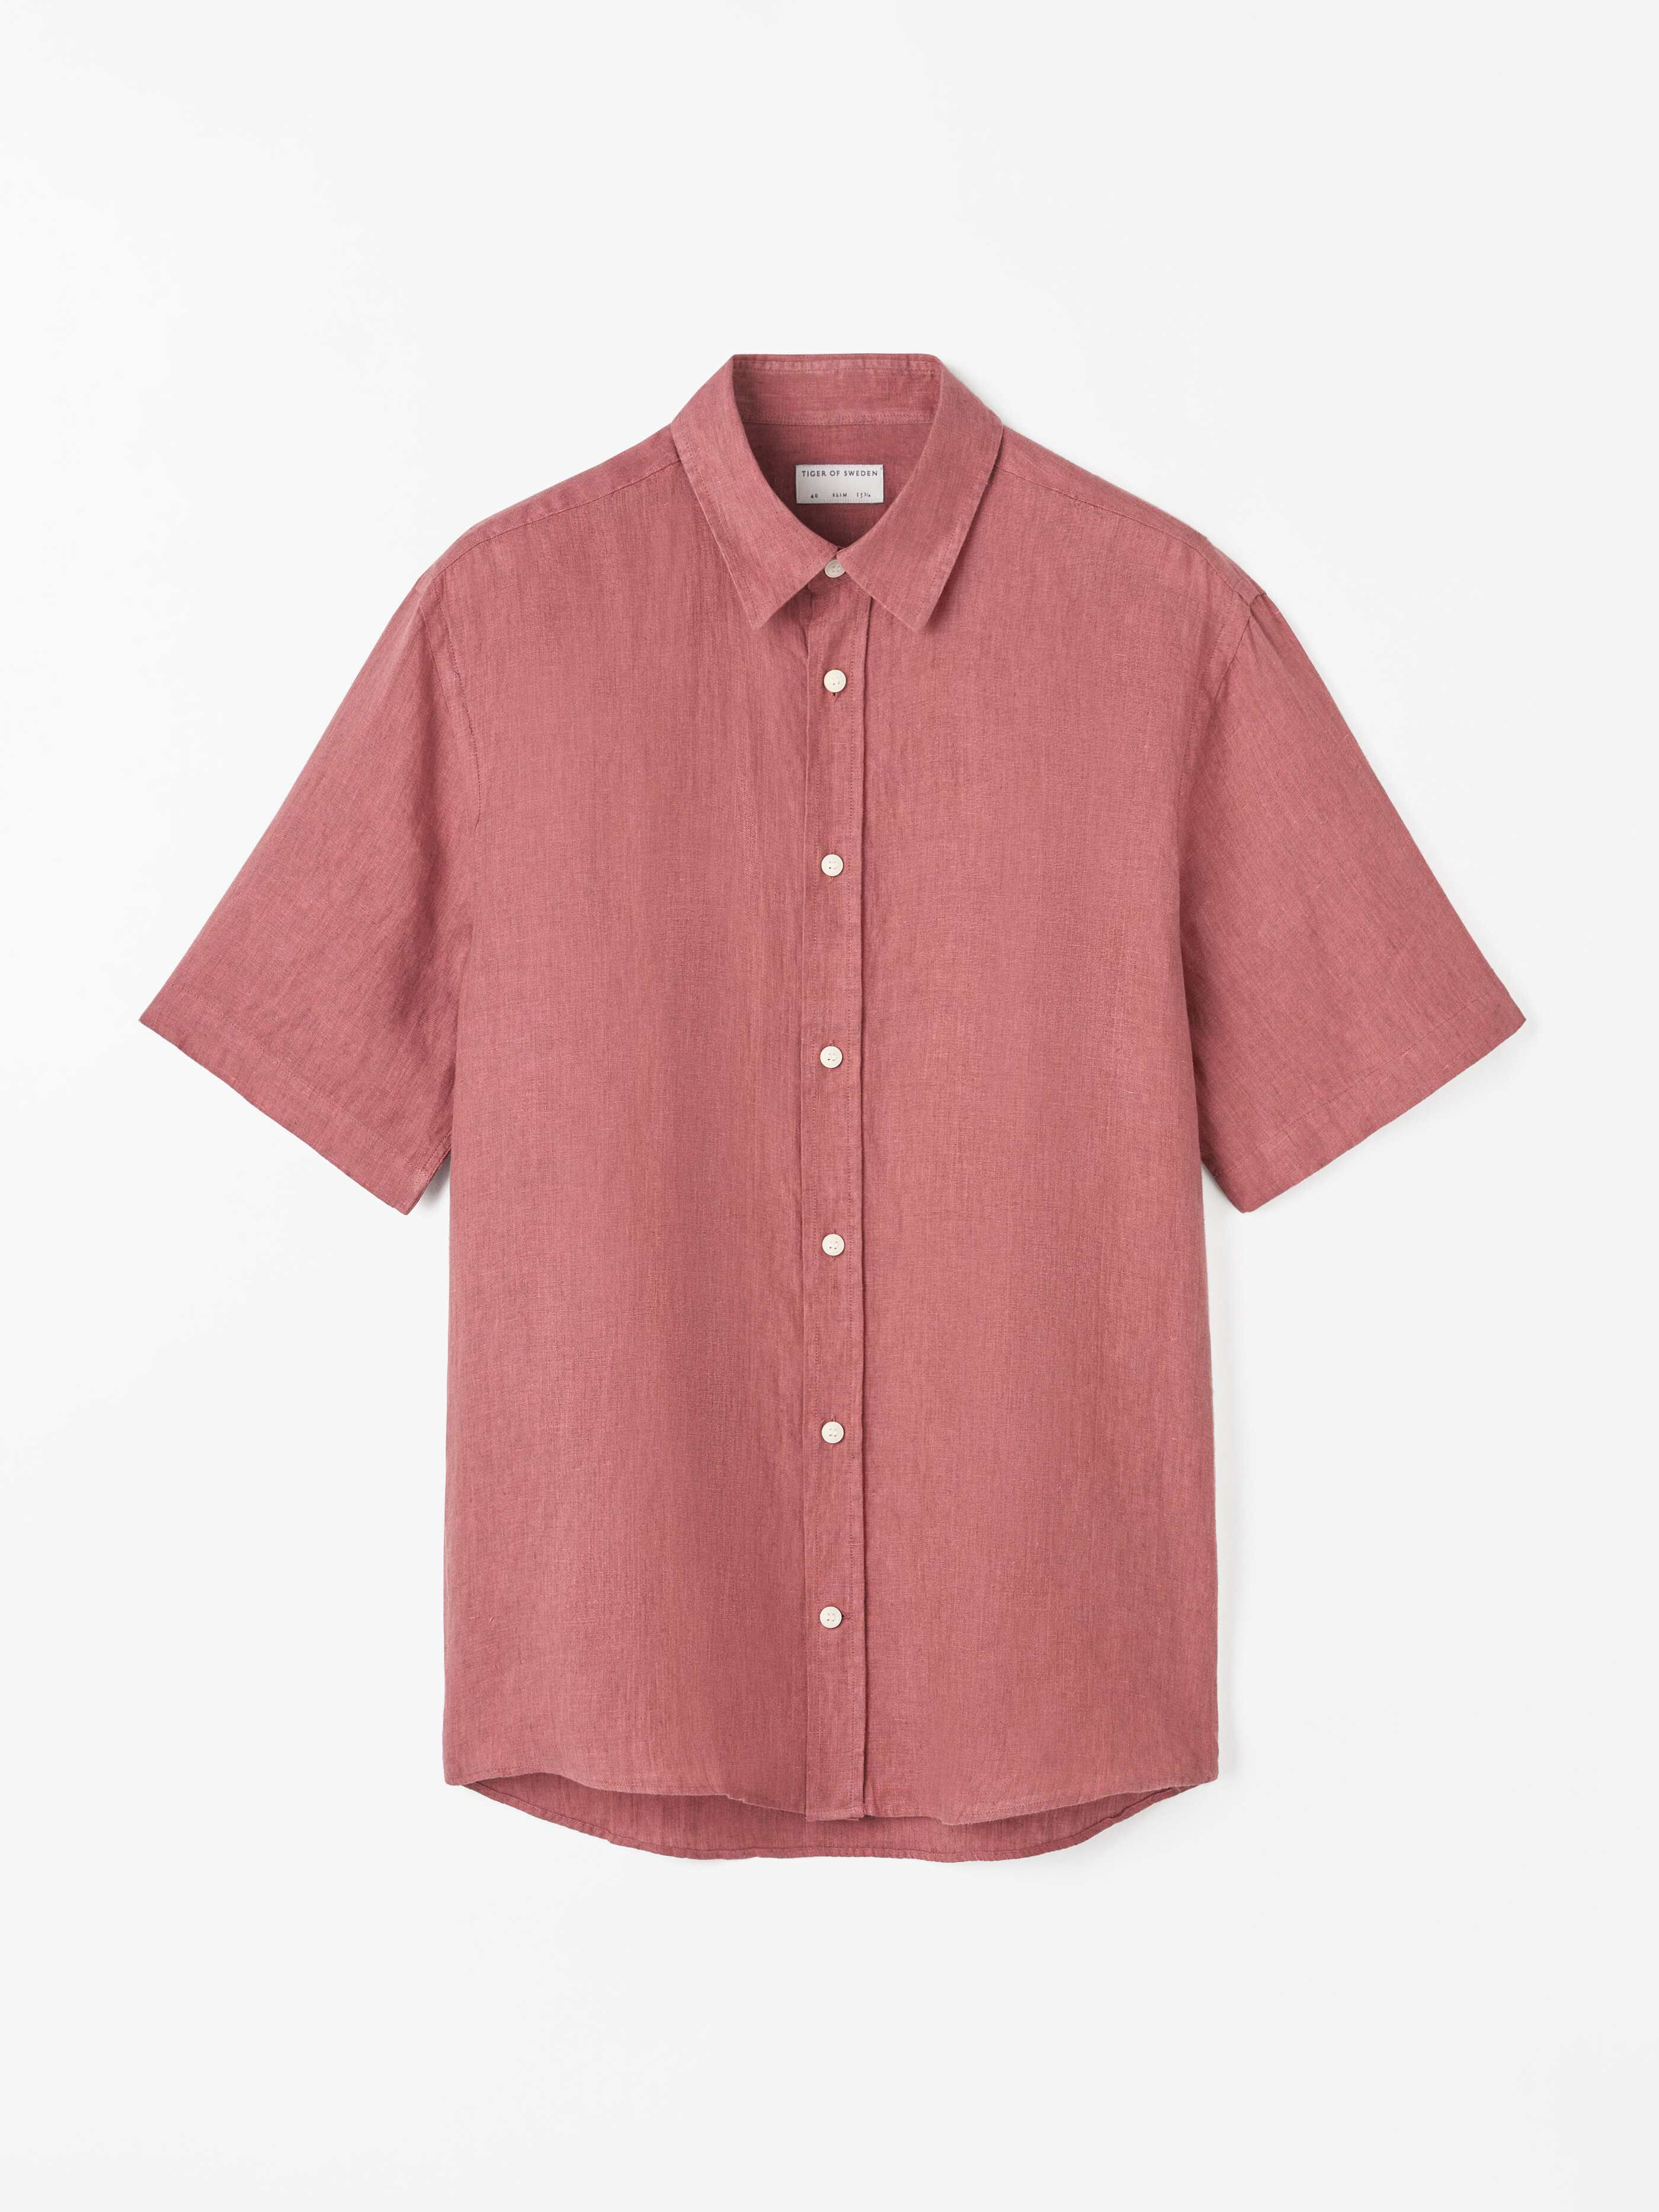 TIGER OF SWEDEN Spenser SS Shirt in Rose Brown T69002017| eightywingold 